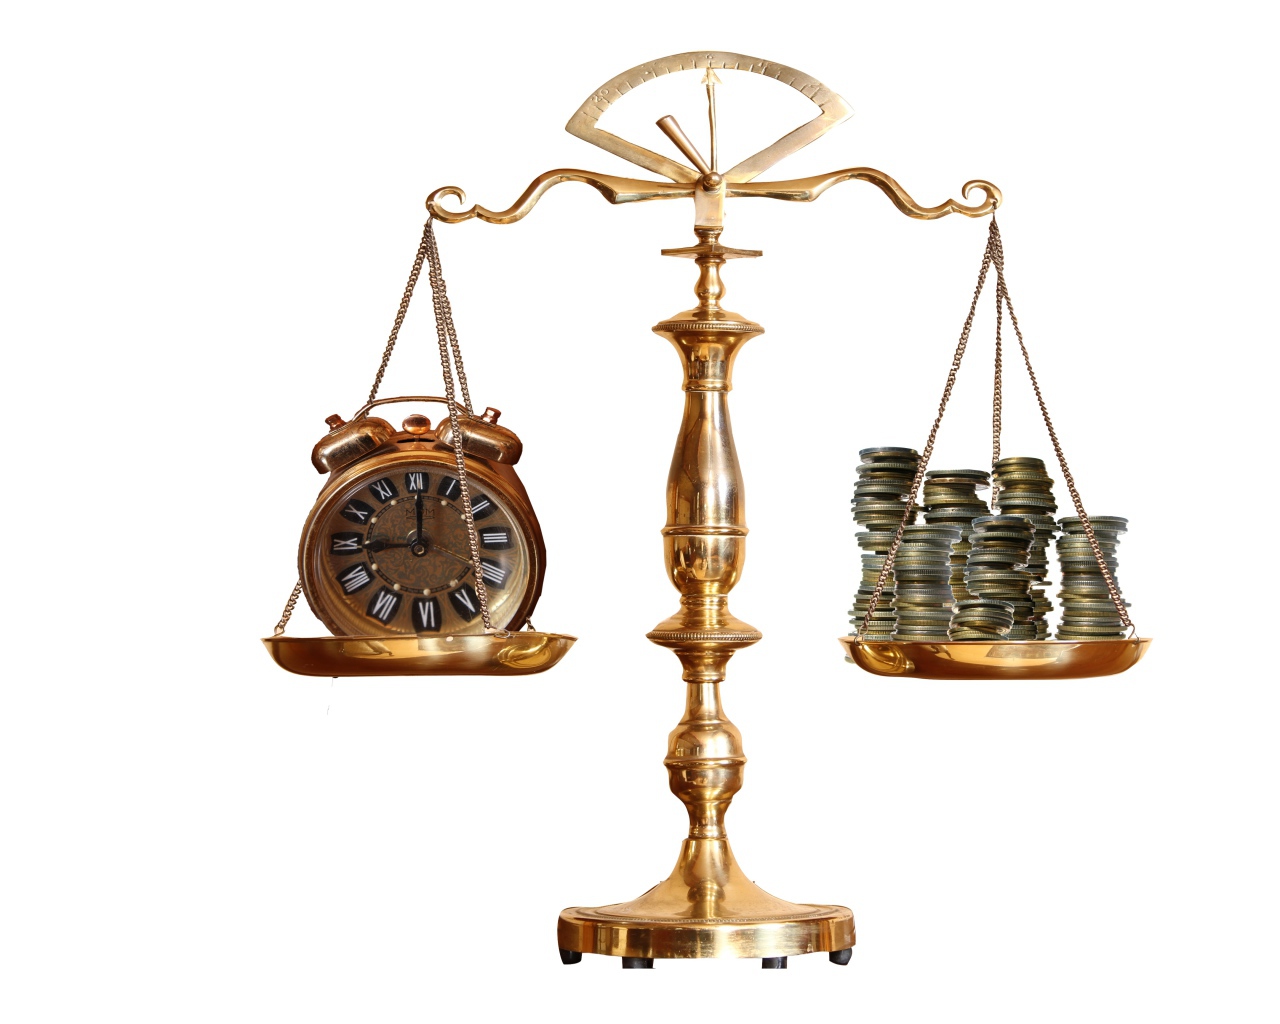 Scales with a clock and coins on the bowls